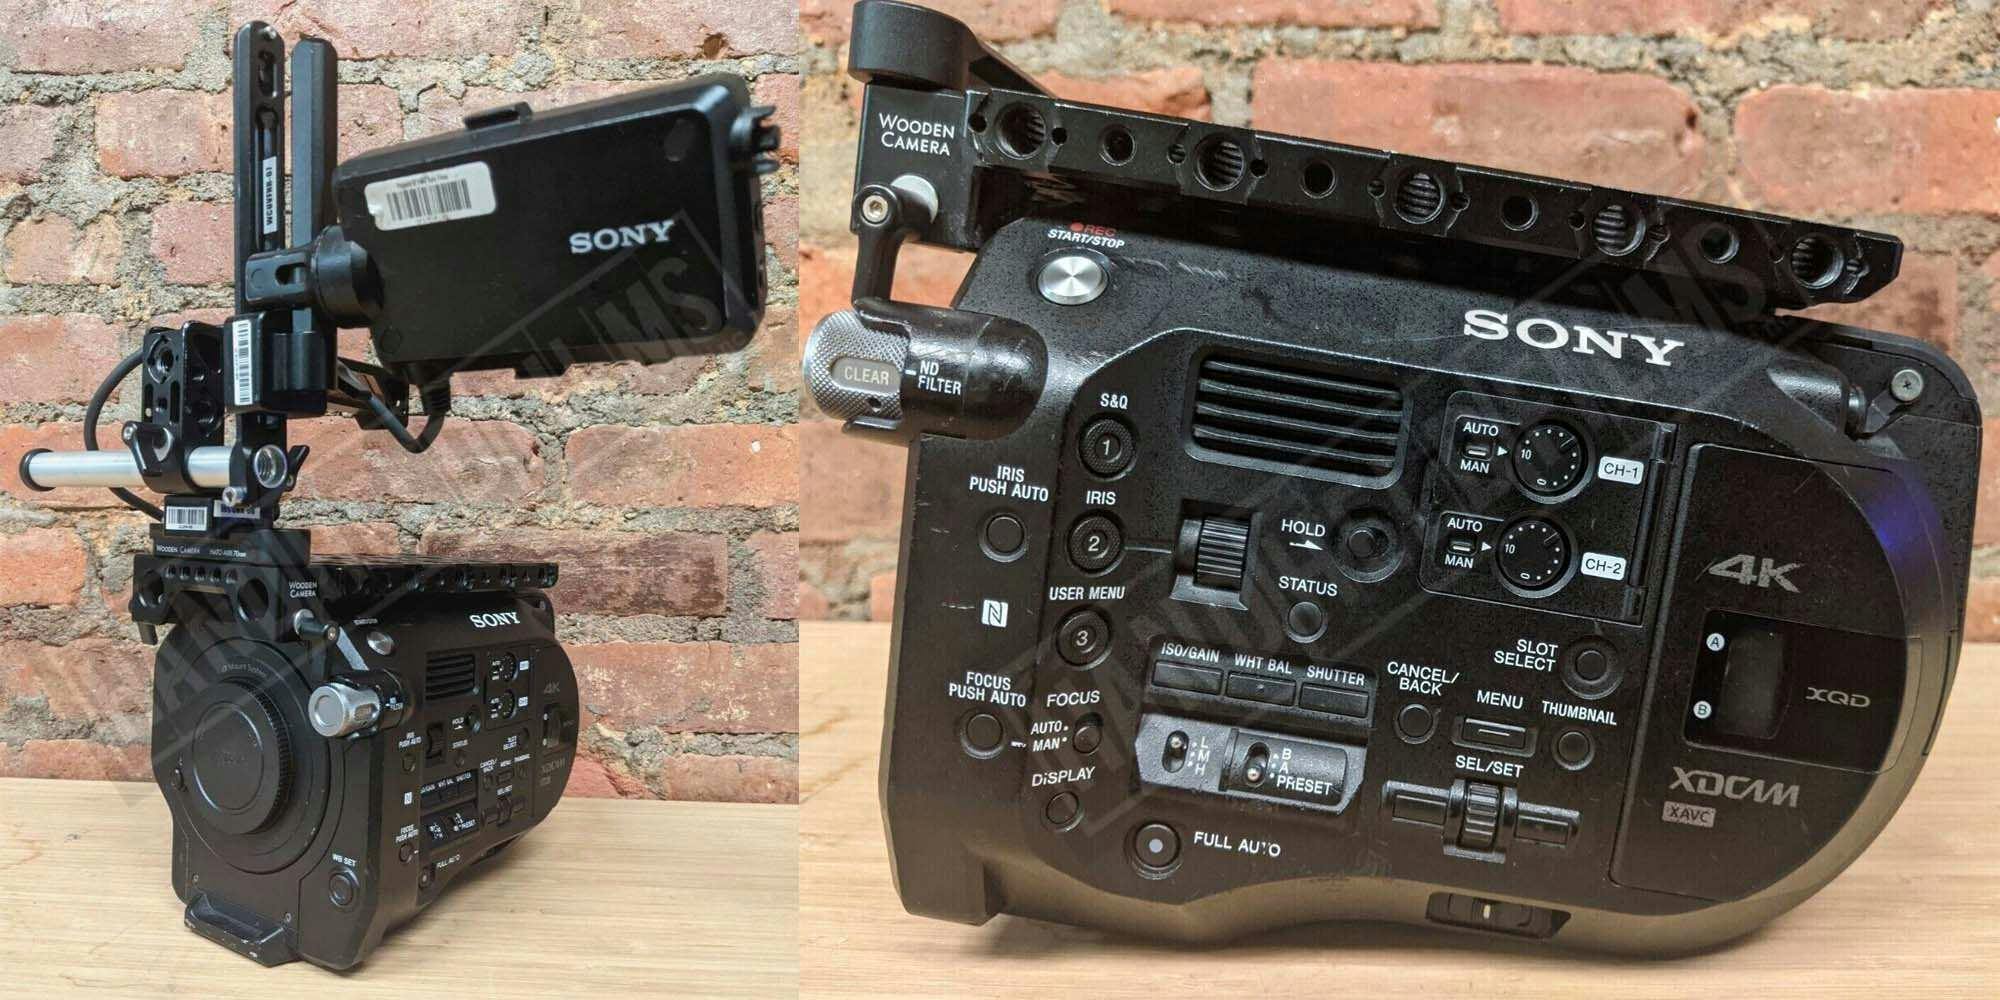 Cover Image for Sony PXW-FS7 w/ Accessories (SN: 0022596)